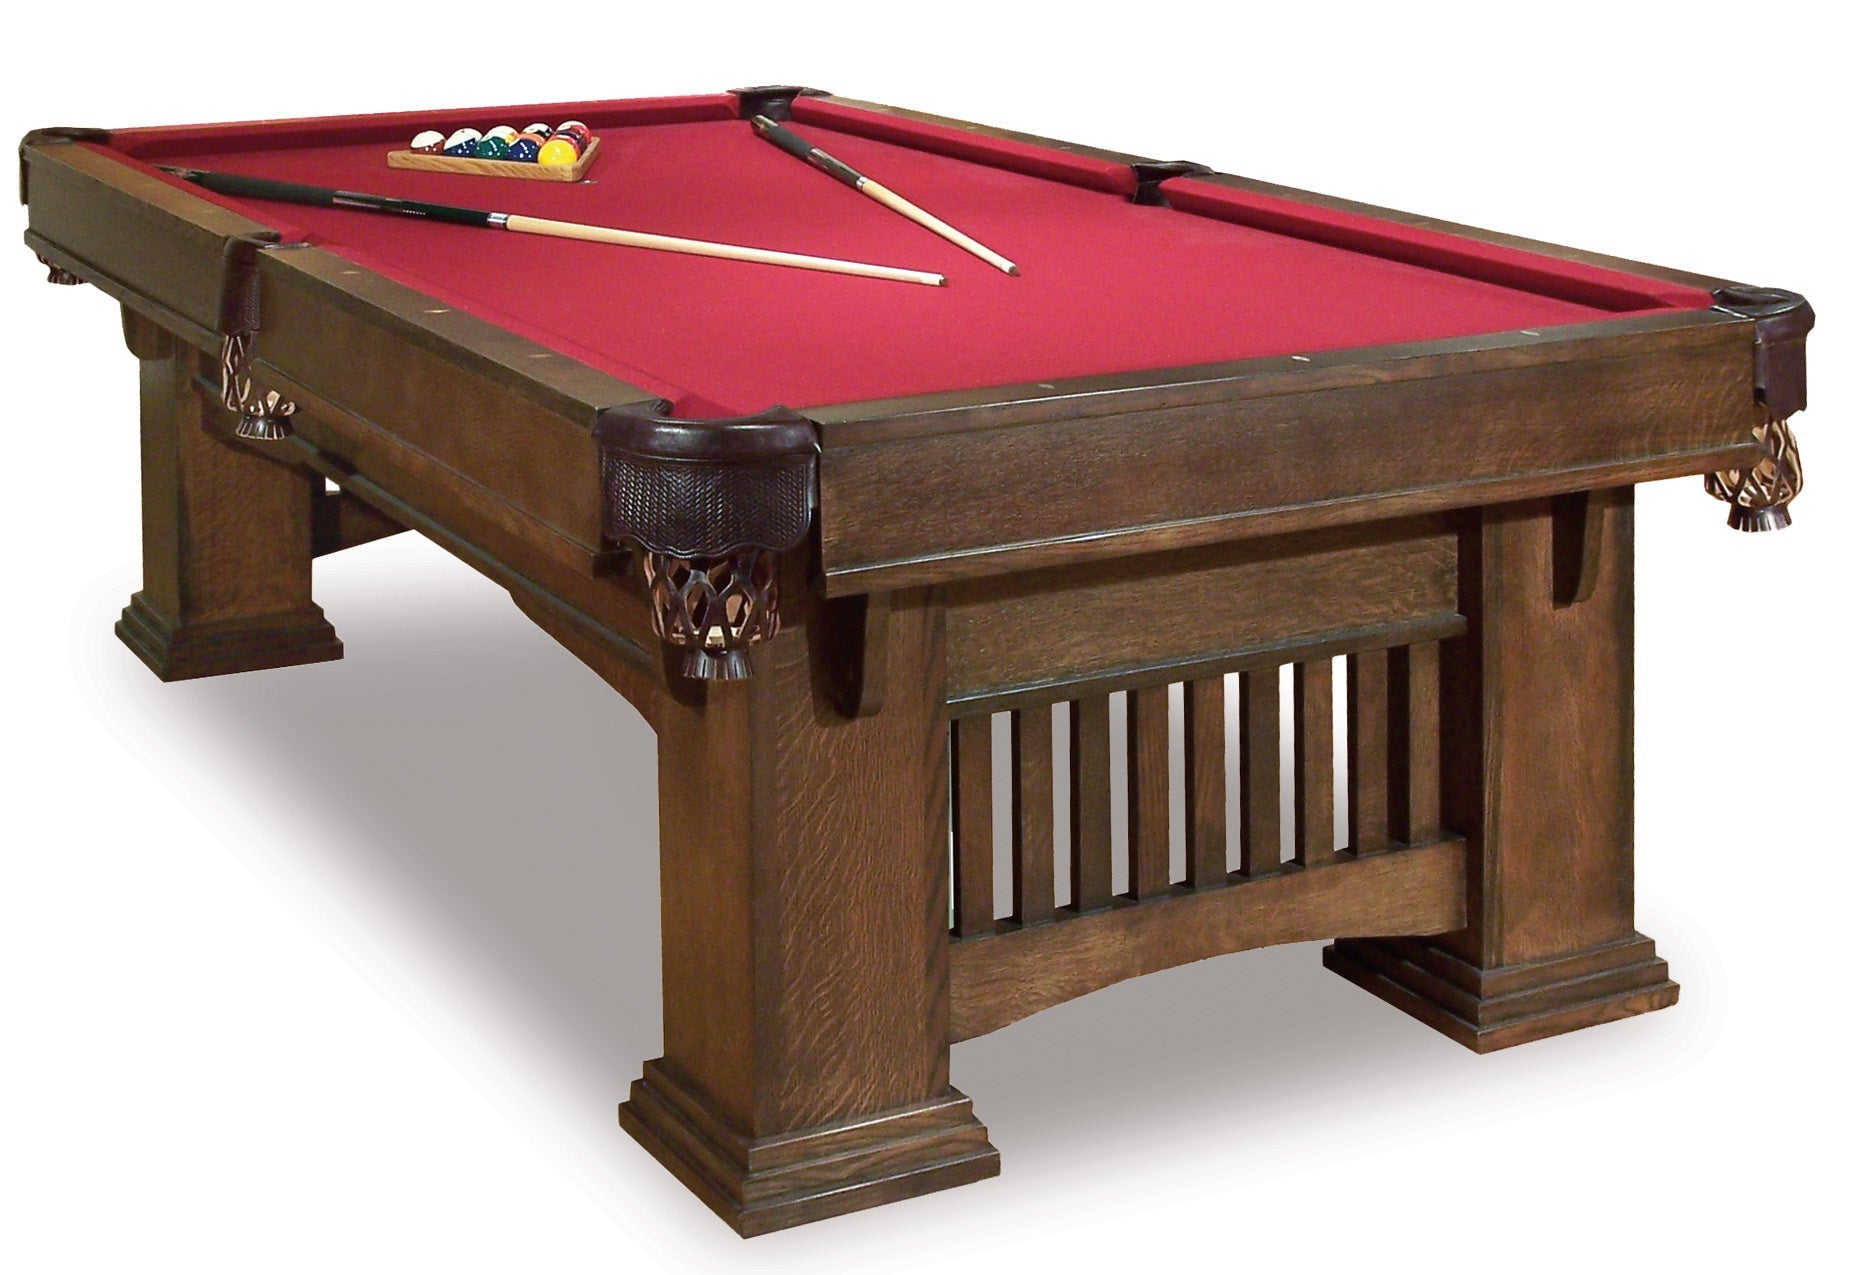 8' Hand-crafted Classic Mission Pool Table (Brown Maple)